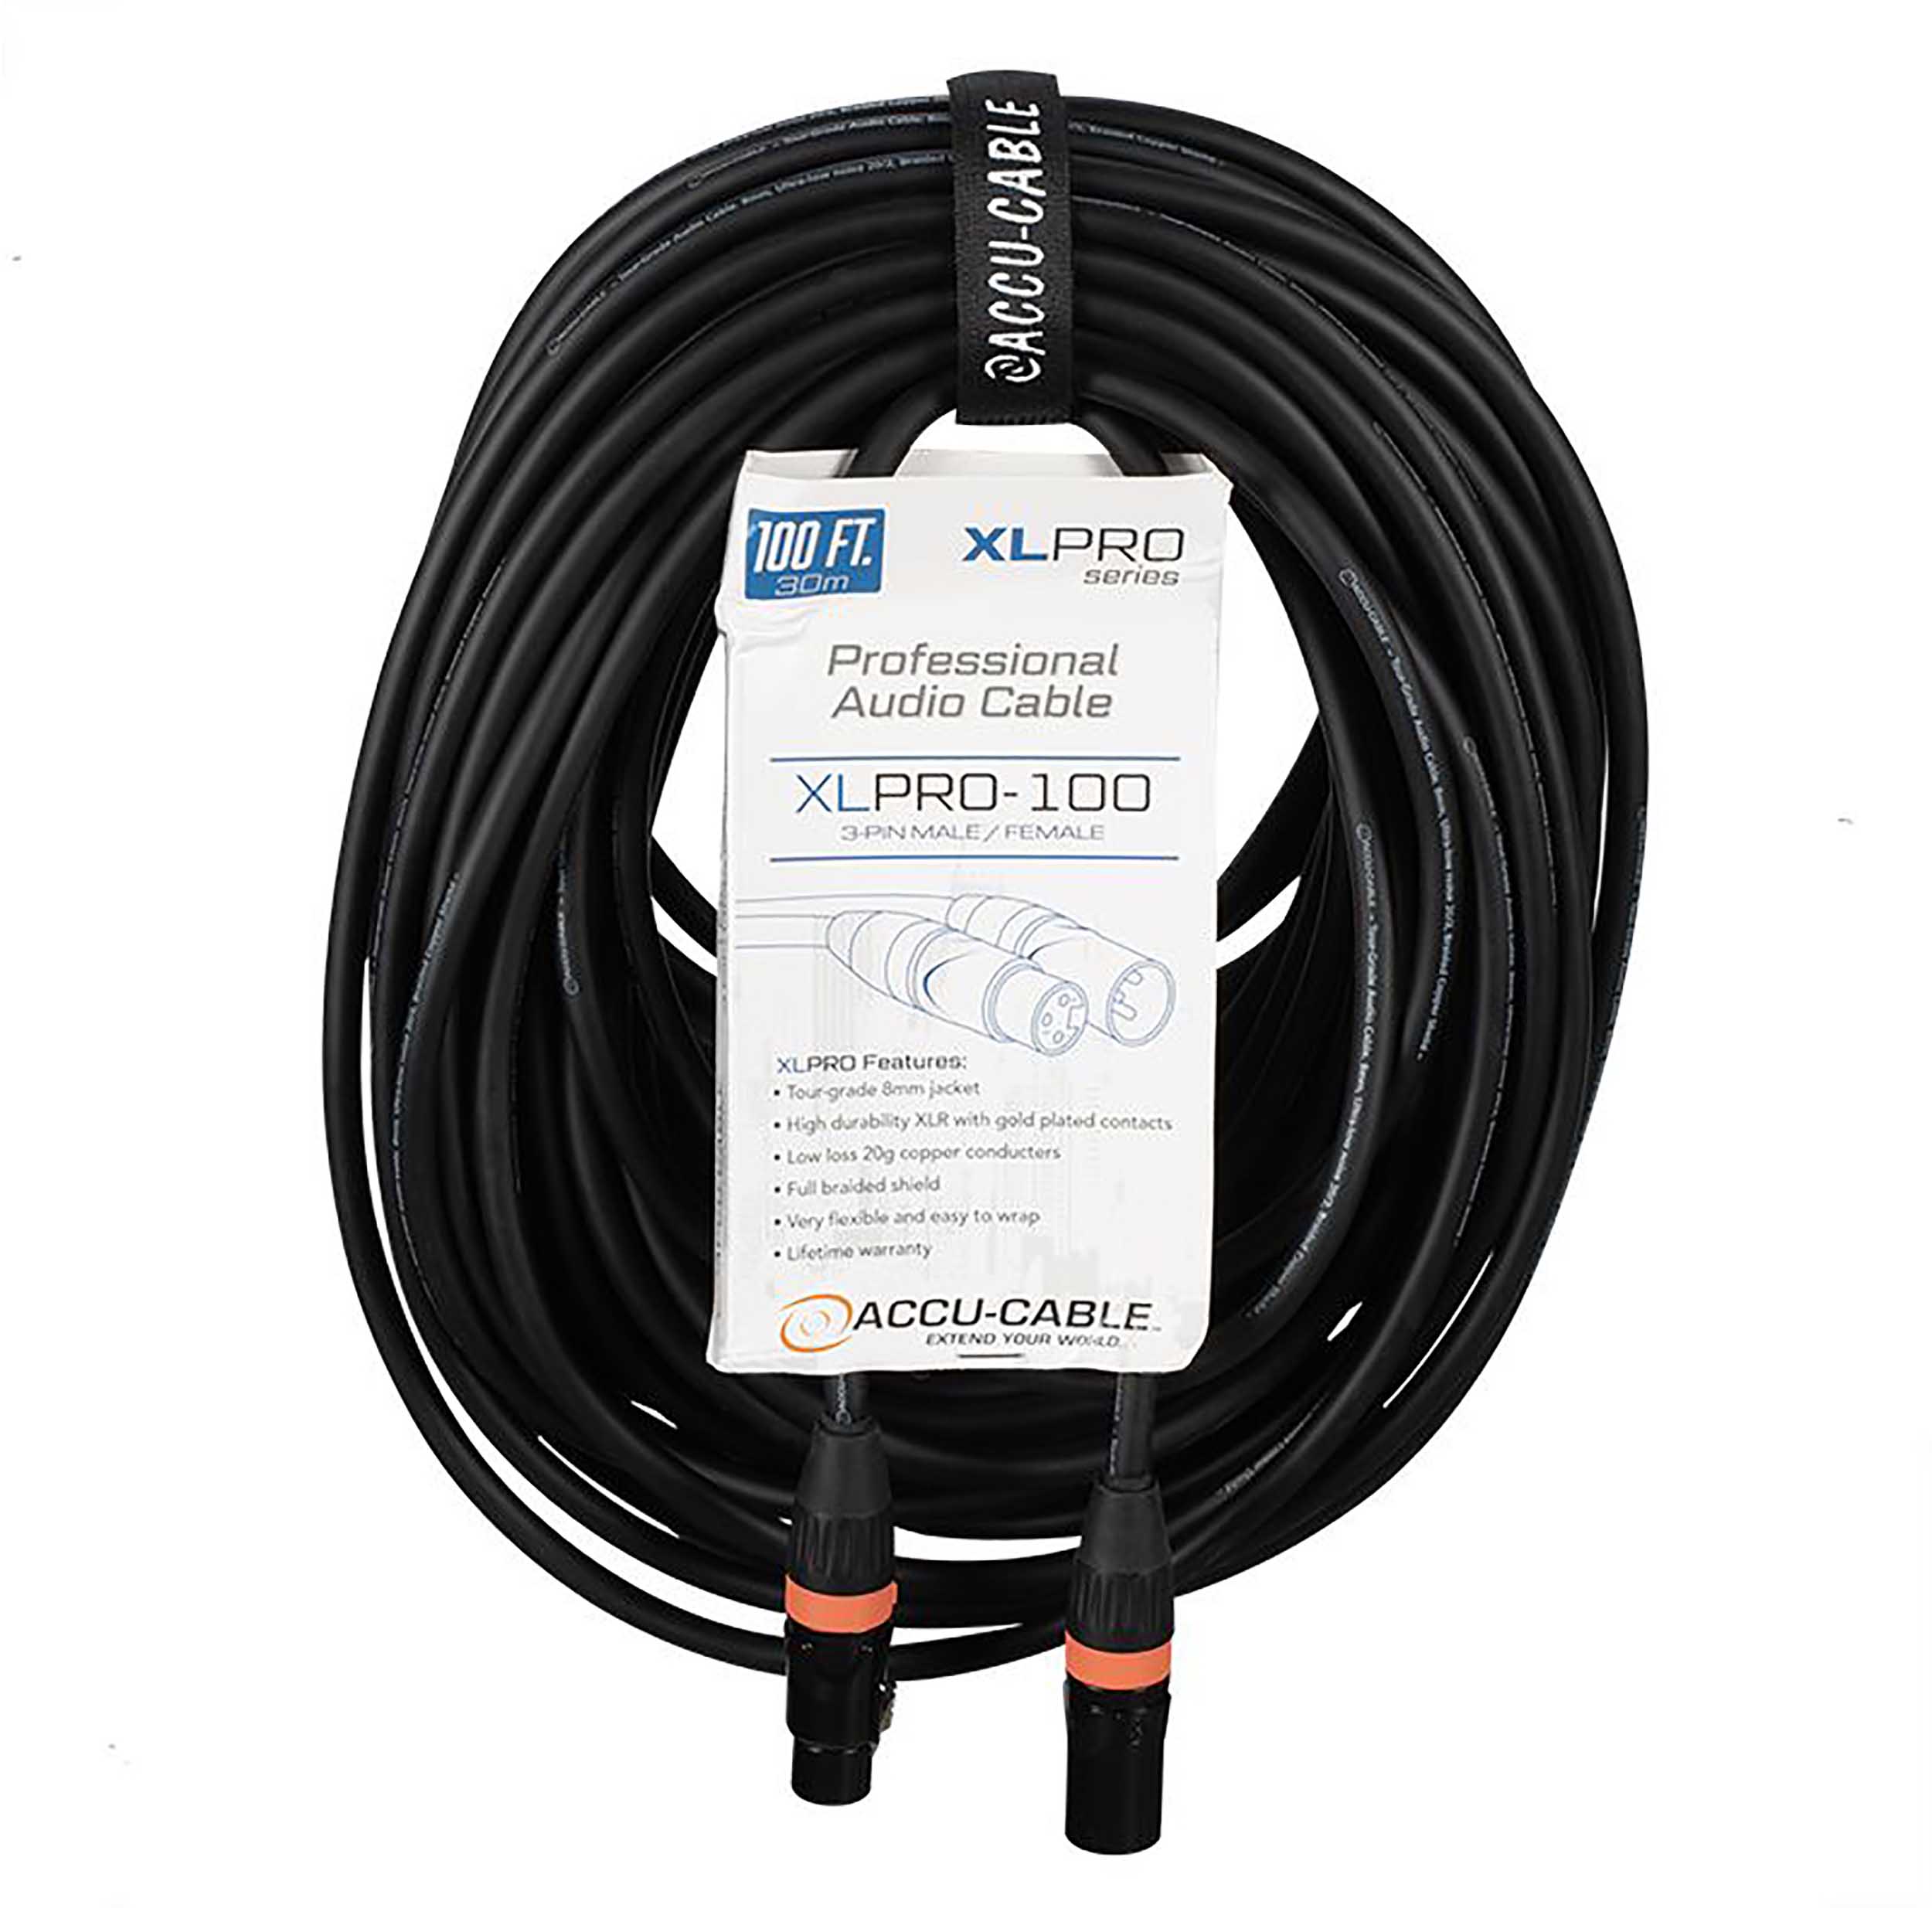 Accu-Cable XLPRO, Professional Audio Cable with Male to Female XLR Connections by Accu Cable